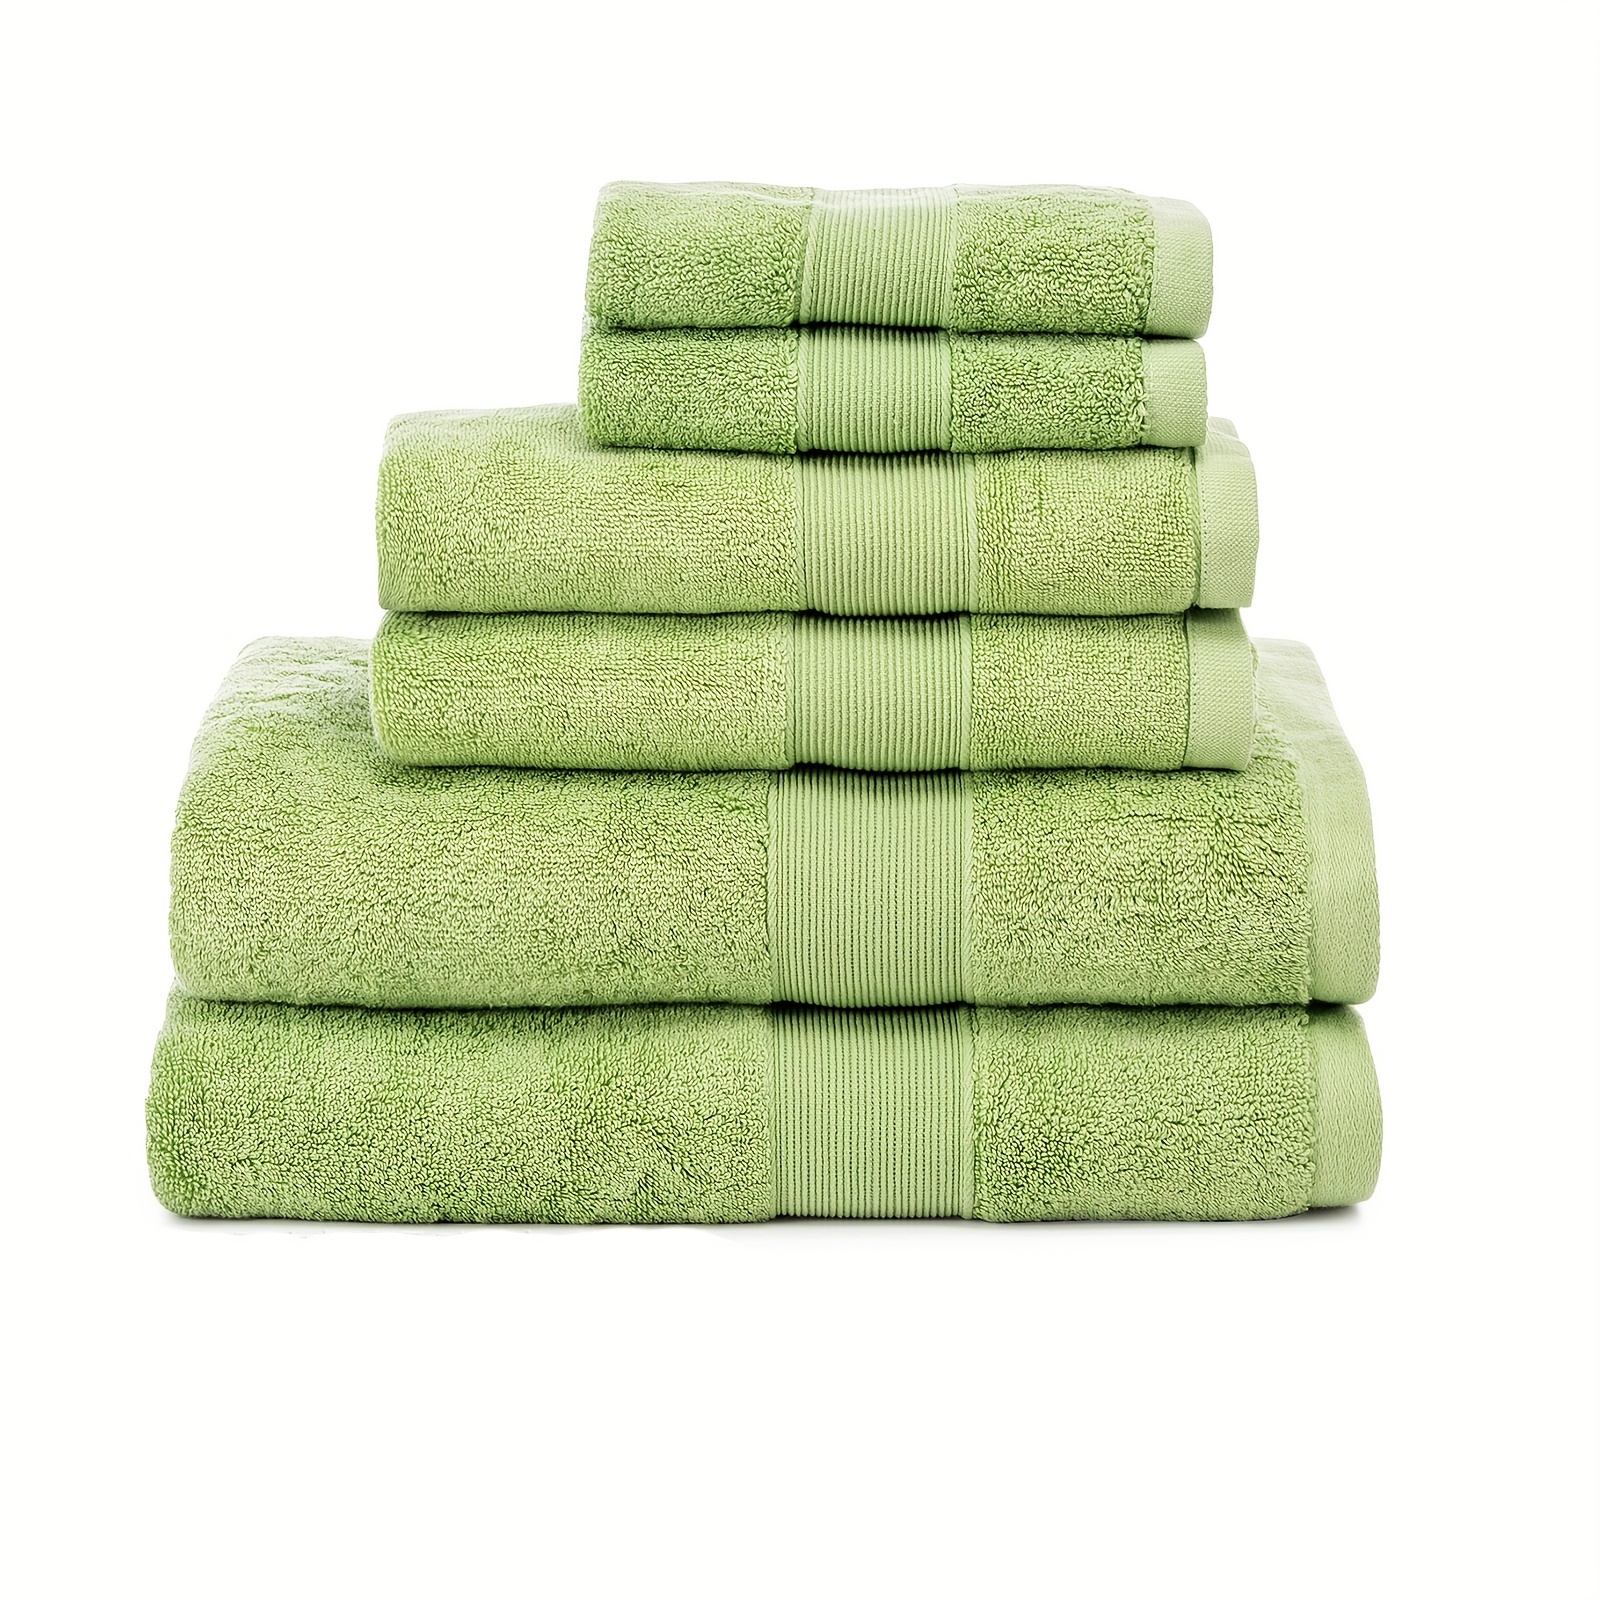 6pcs Towel Set Including 2 Bath Towels, 2 Hand Towels, 2 Washcloths, Soft,  Quick-dry And High Absorbency, Green